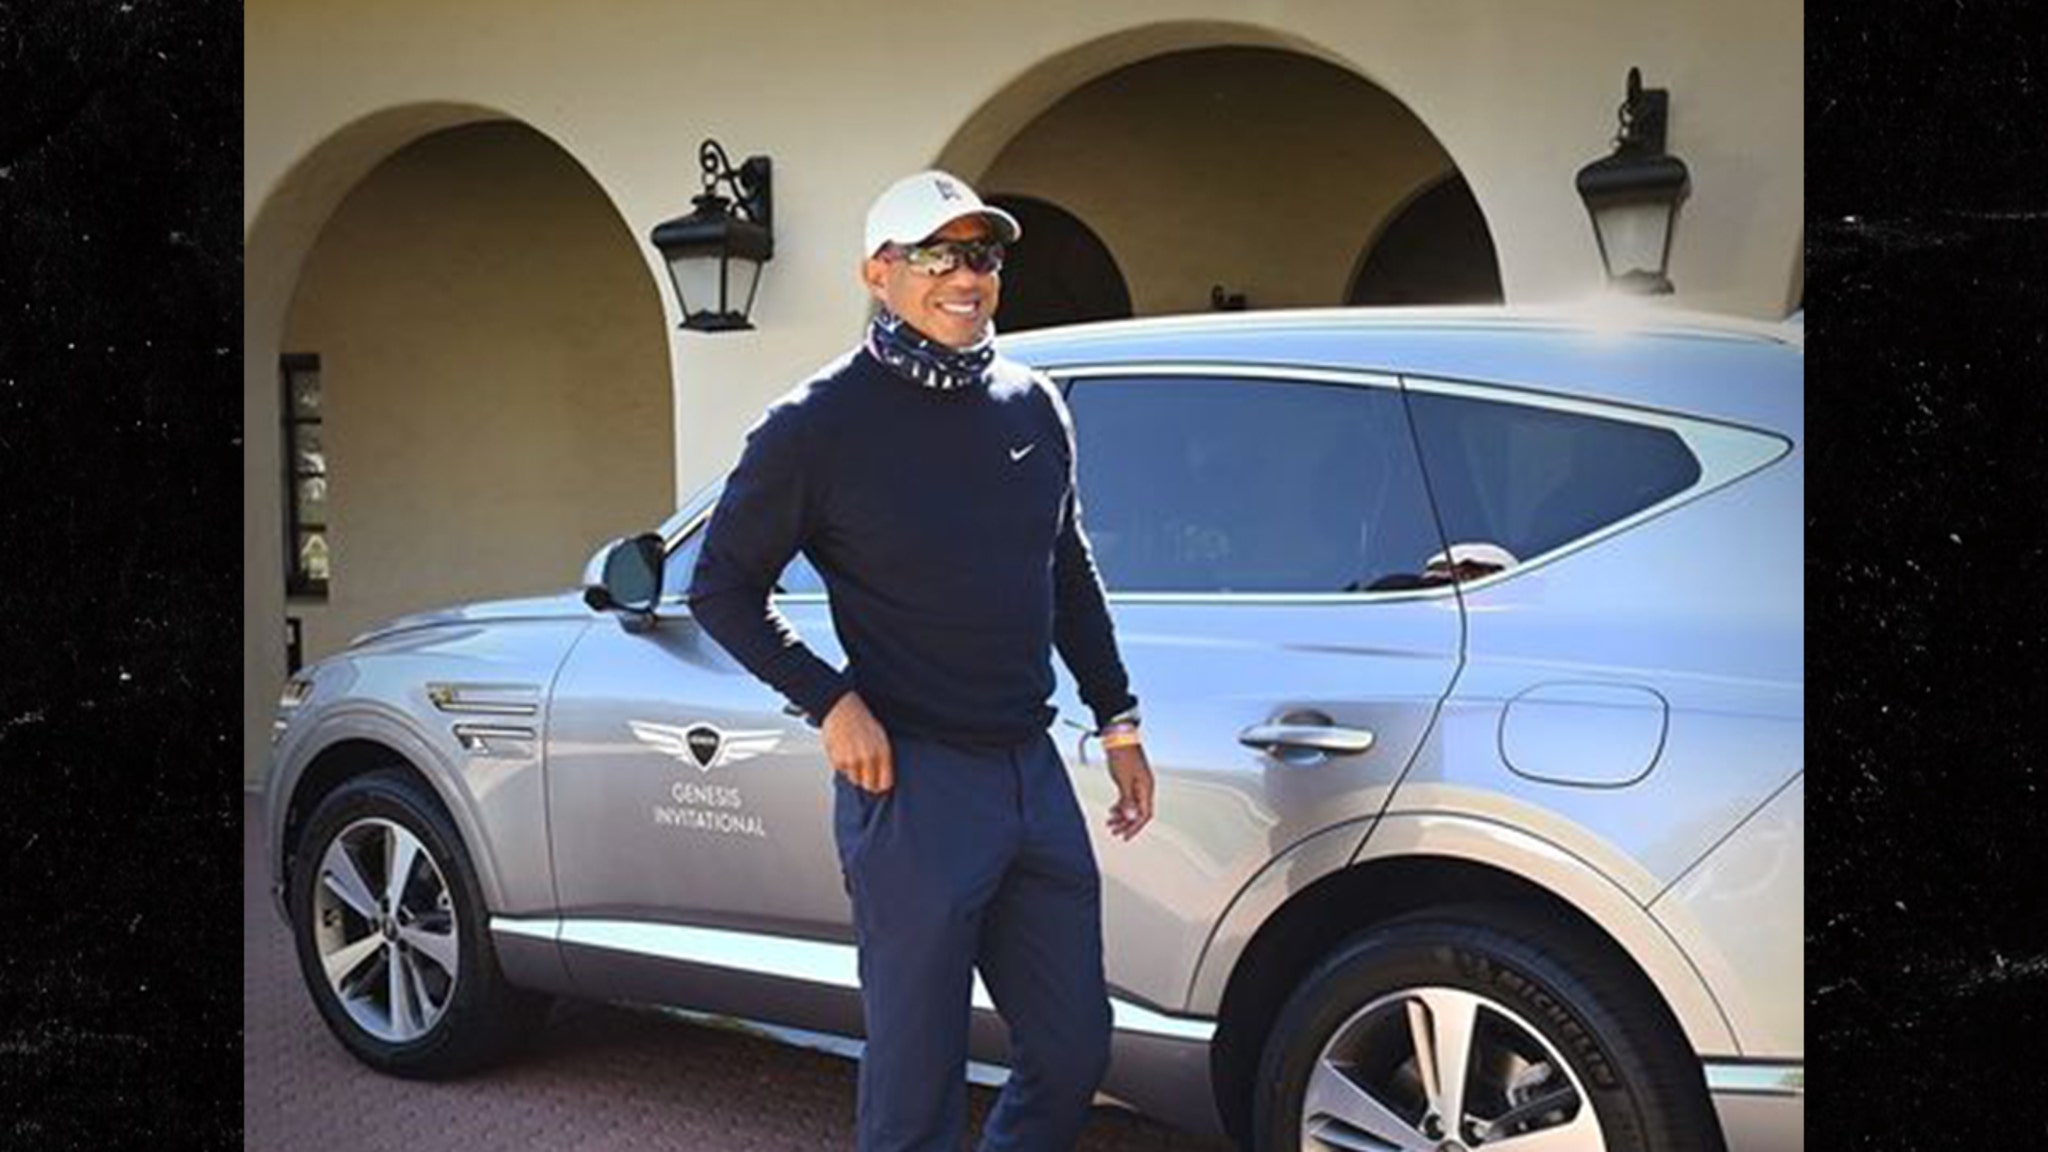 Tiger Woods Crashed SUV packed with life-saving safety features